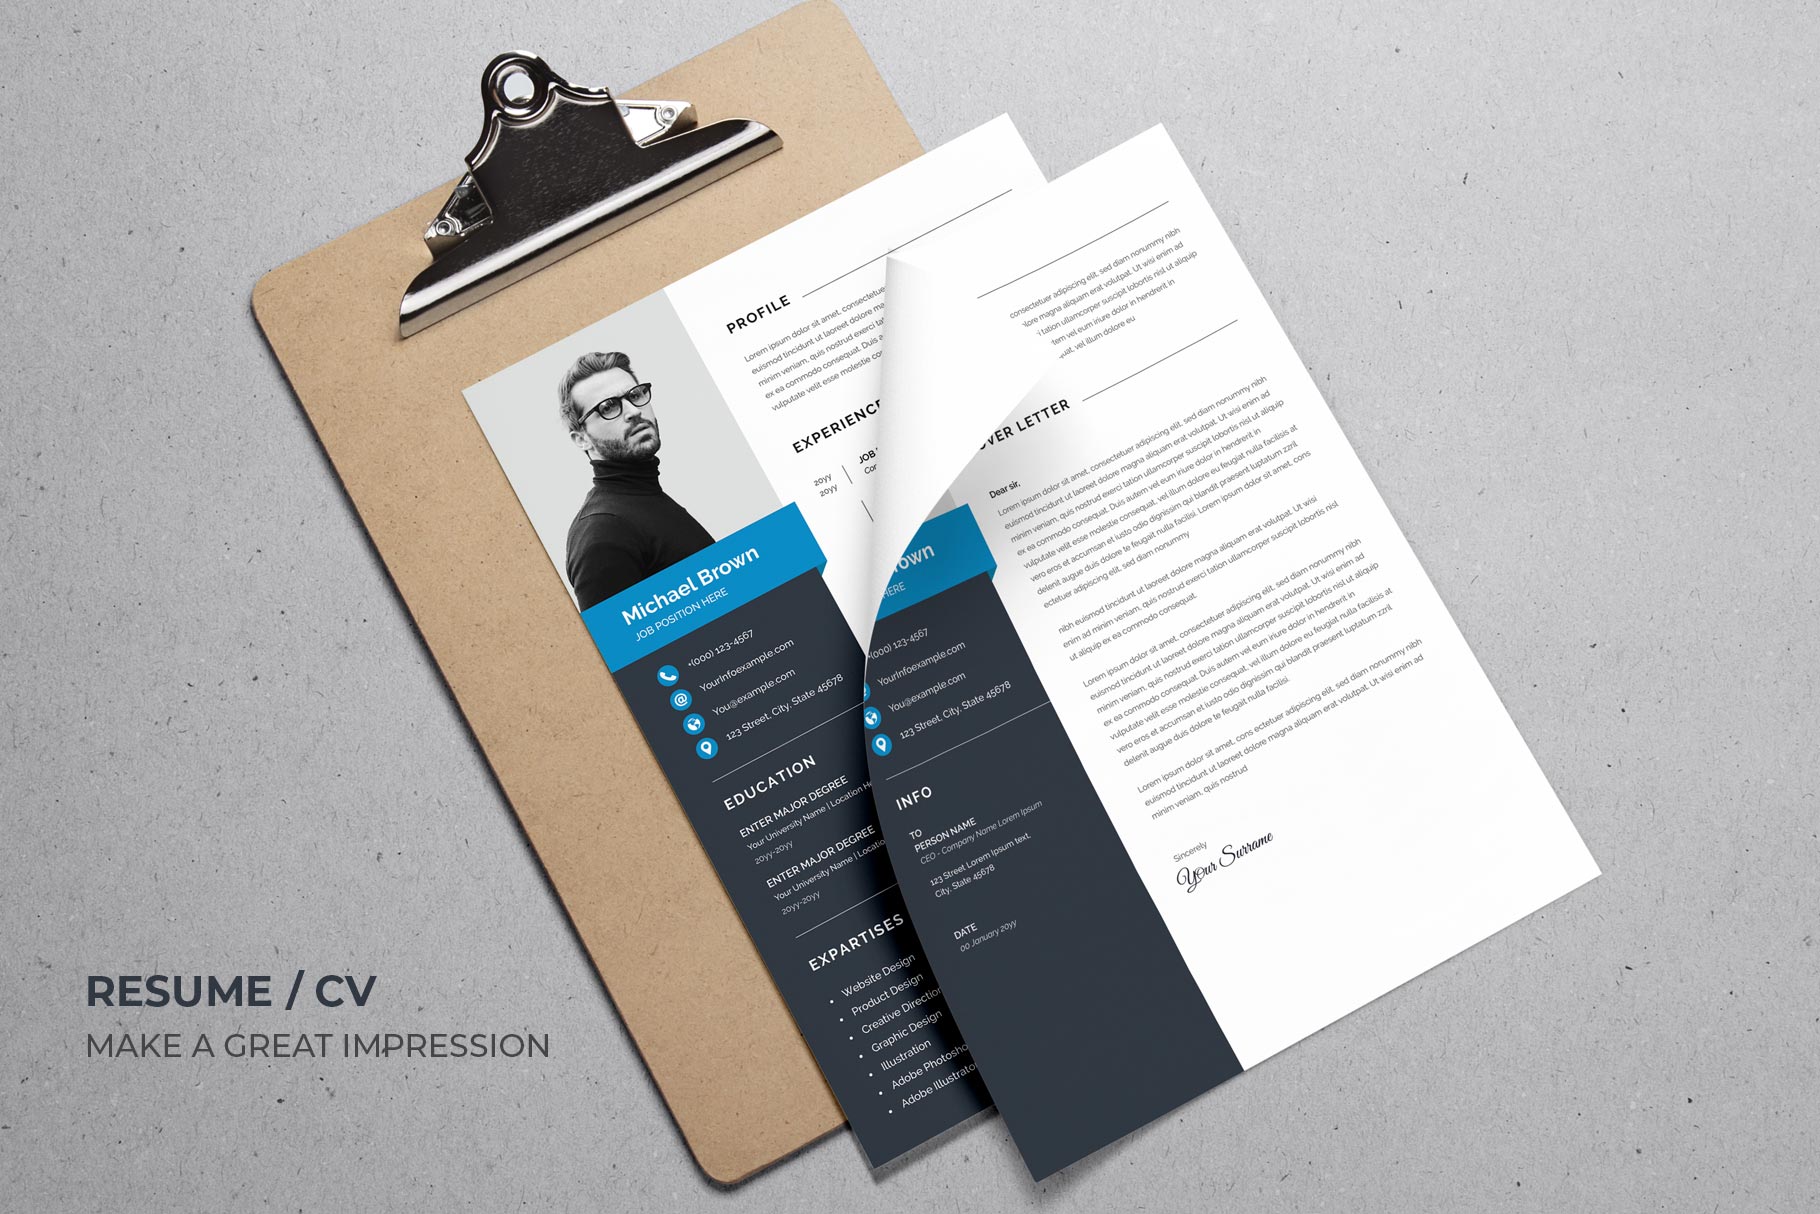 The Minimal Resume/CV template will help you get that great job you want.